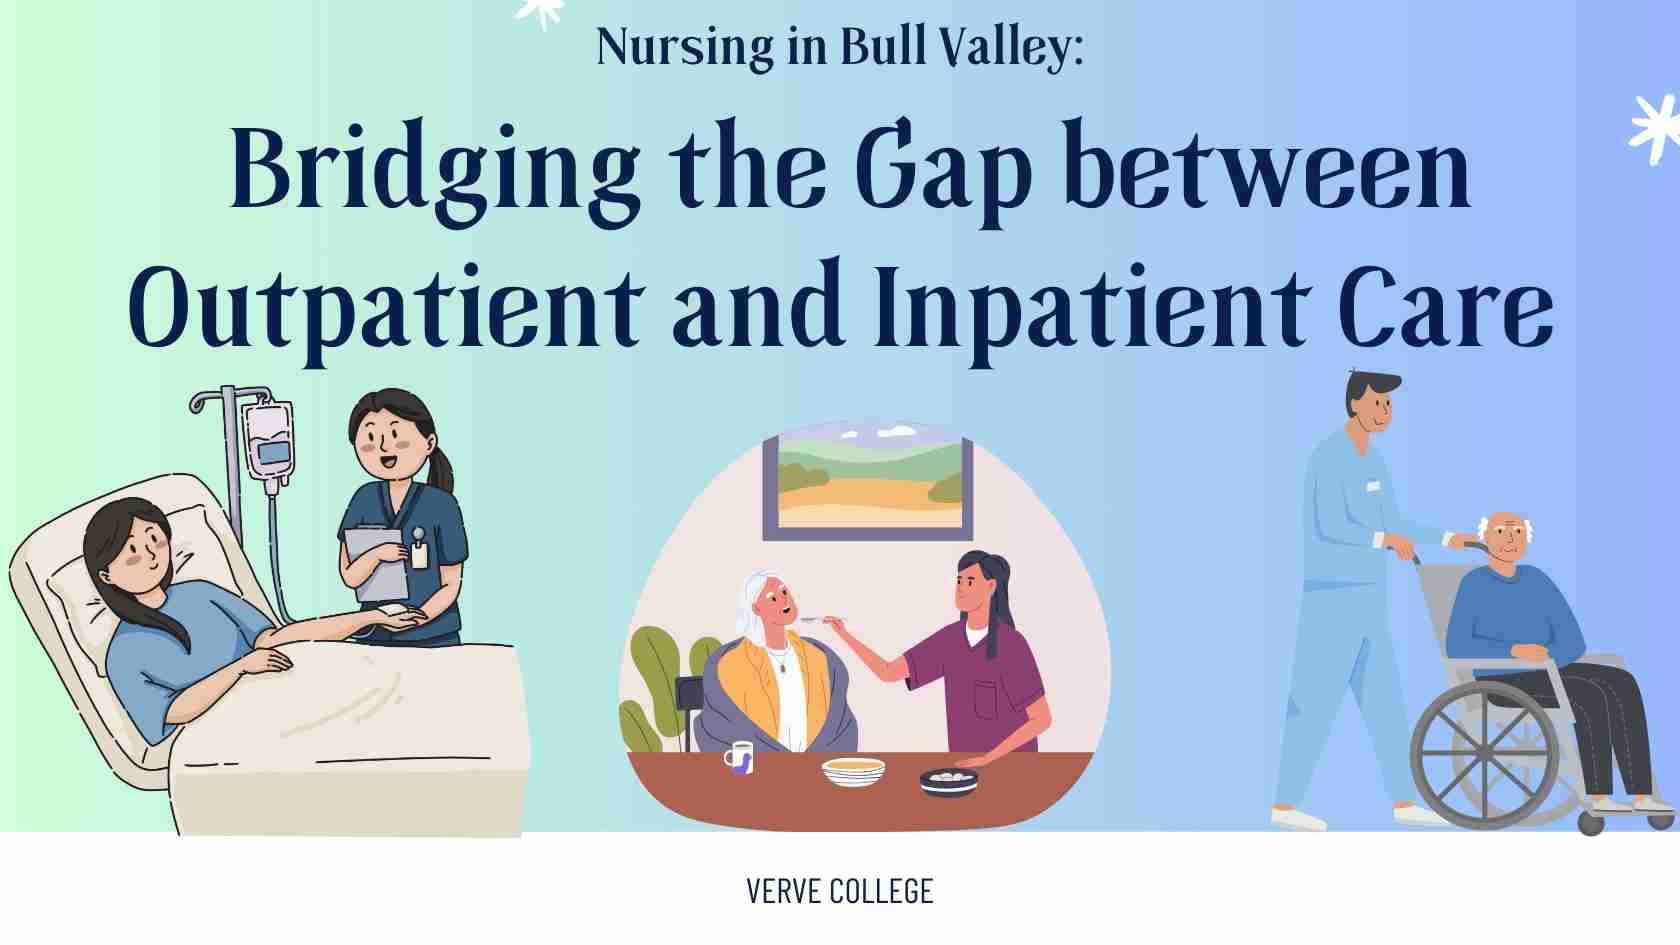 Nursing in Bull Valley: Bridging the Gap between Outpatient and Inpatient Care